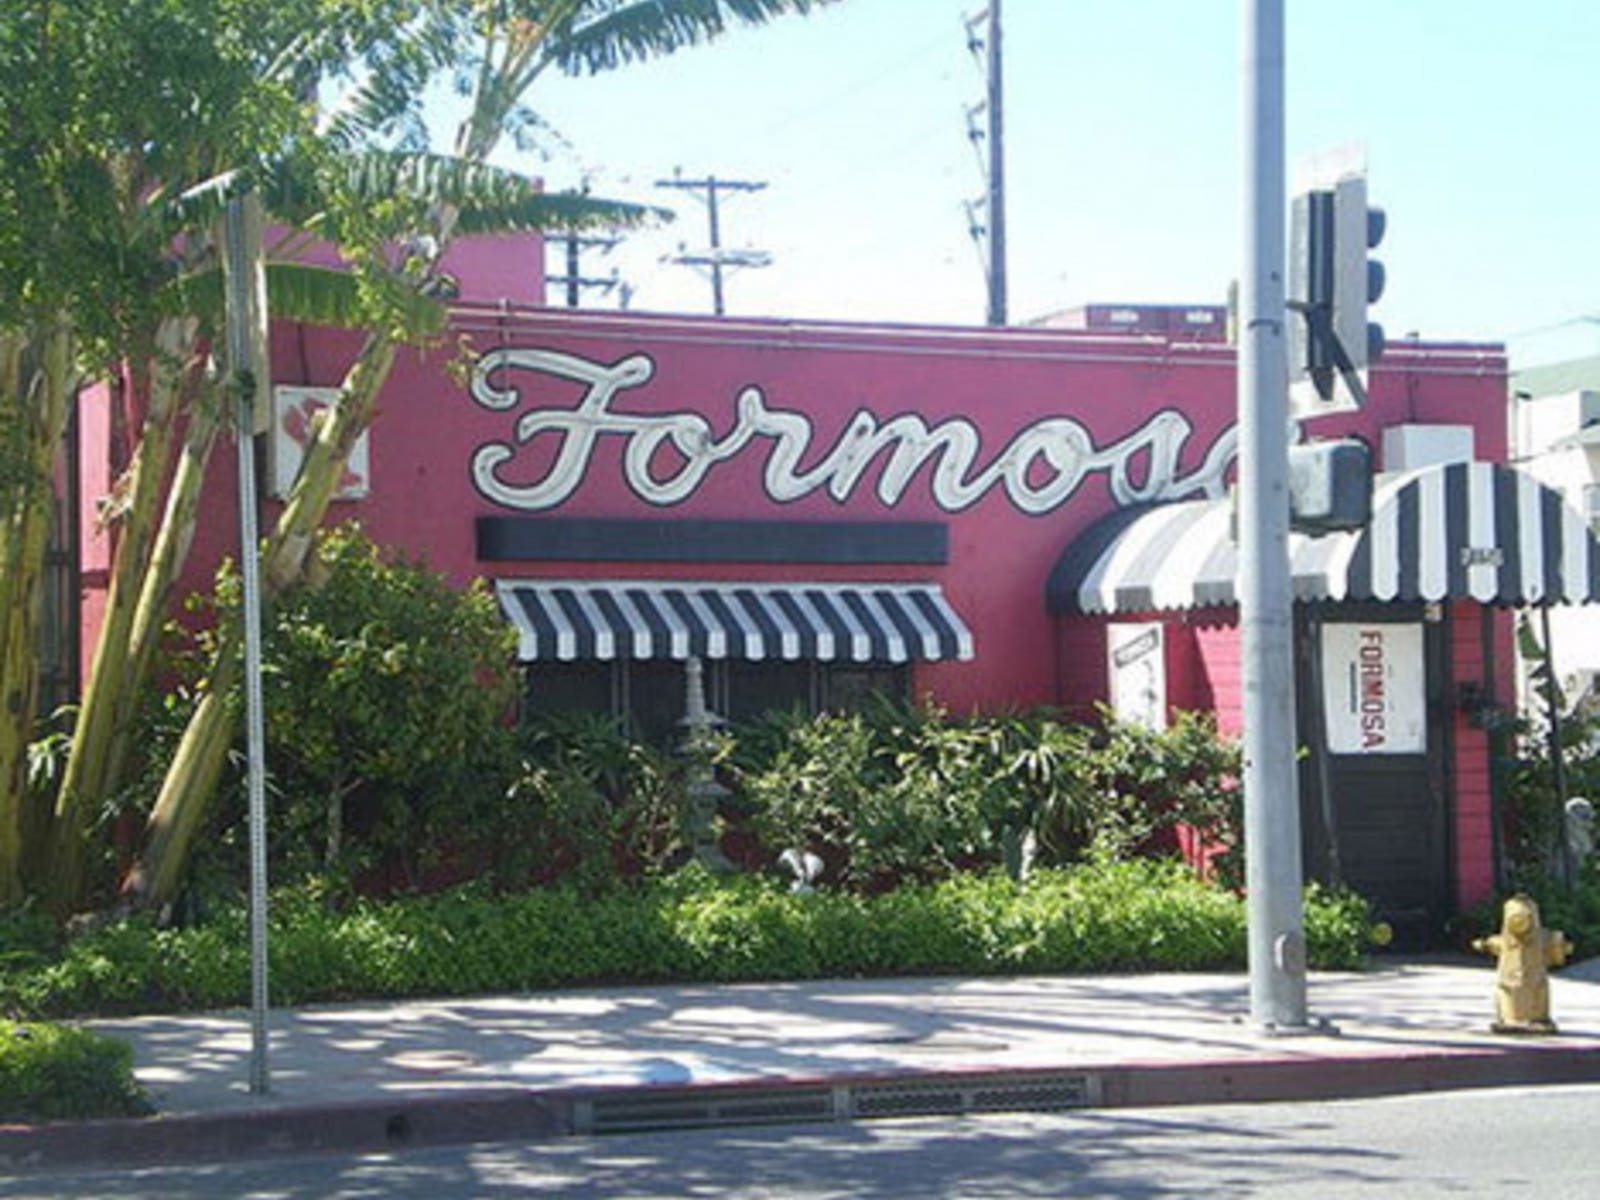 The Formosa Cafe